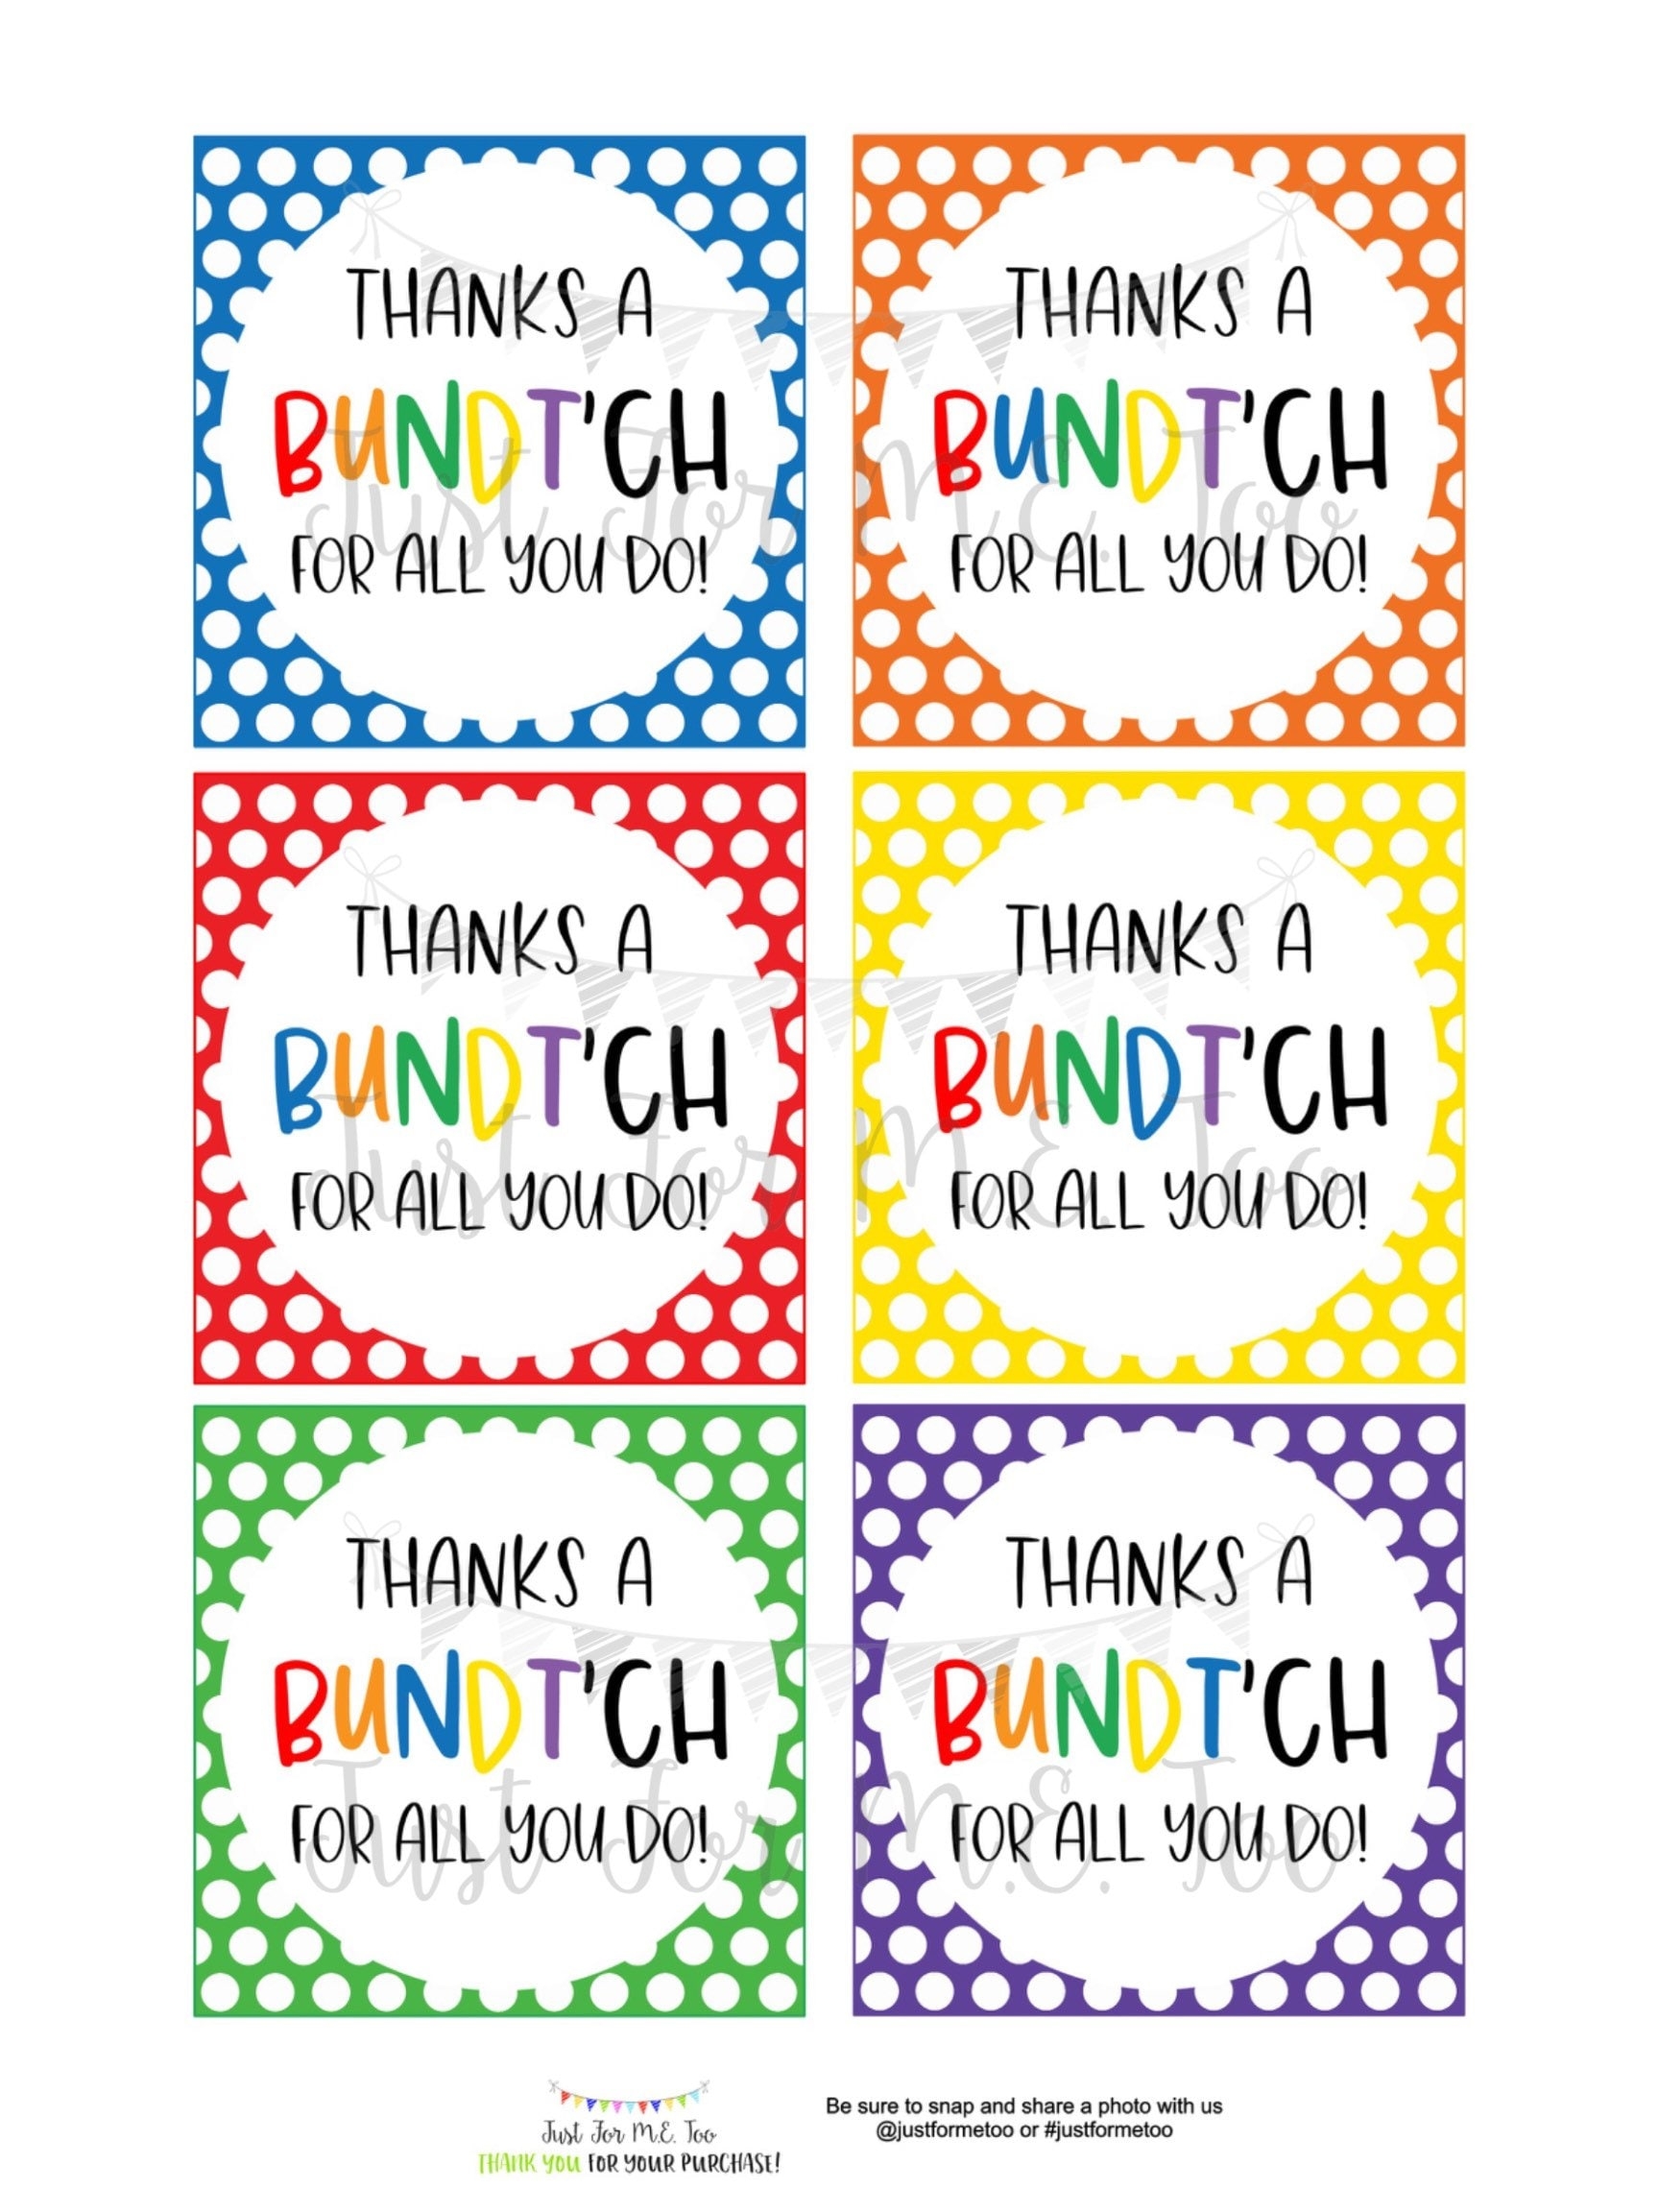 Thank You Printable Tags Instant Download Teacher Tags Square Gift Tag End Of School Teacher Gifts Thank You Tags Treats Bundt Cake